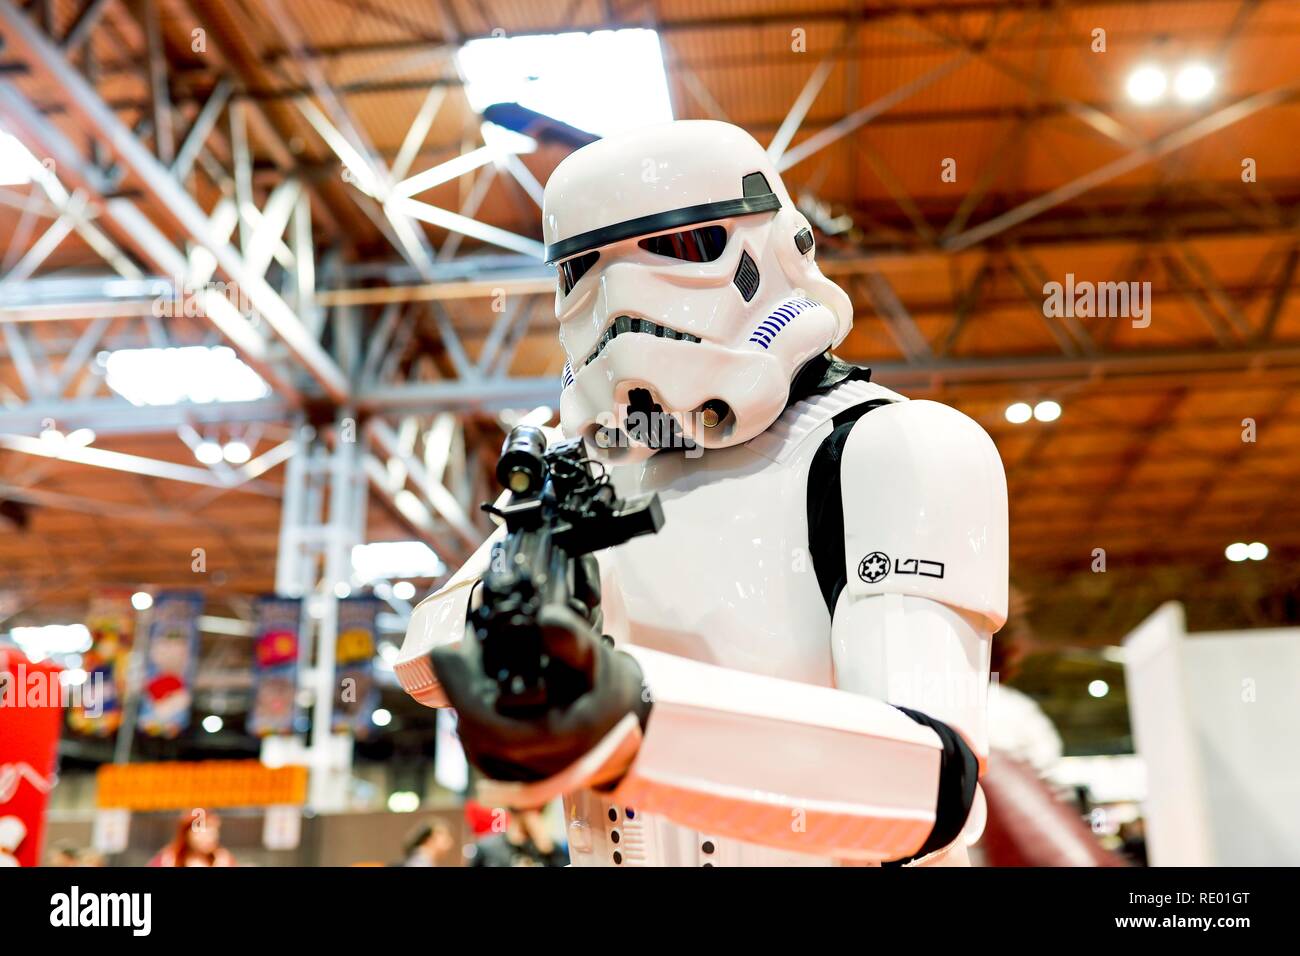 Birmingham, UK - March 17, 2018. A cosplayer dressed in a Storm Trooper costume from Star Wars movies at a comic con in Birmingham, UK pointing a gun Stock Photo